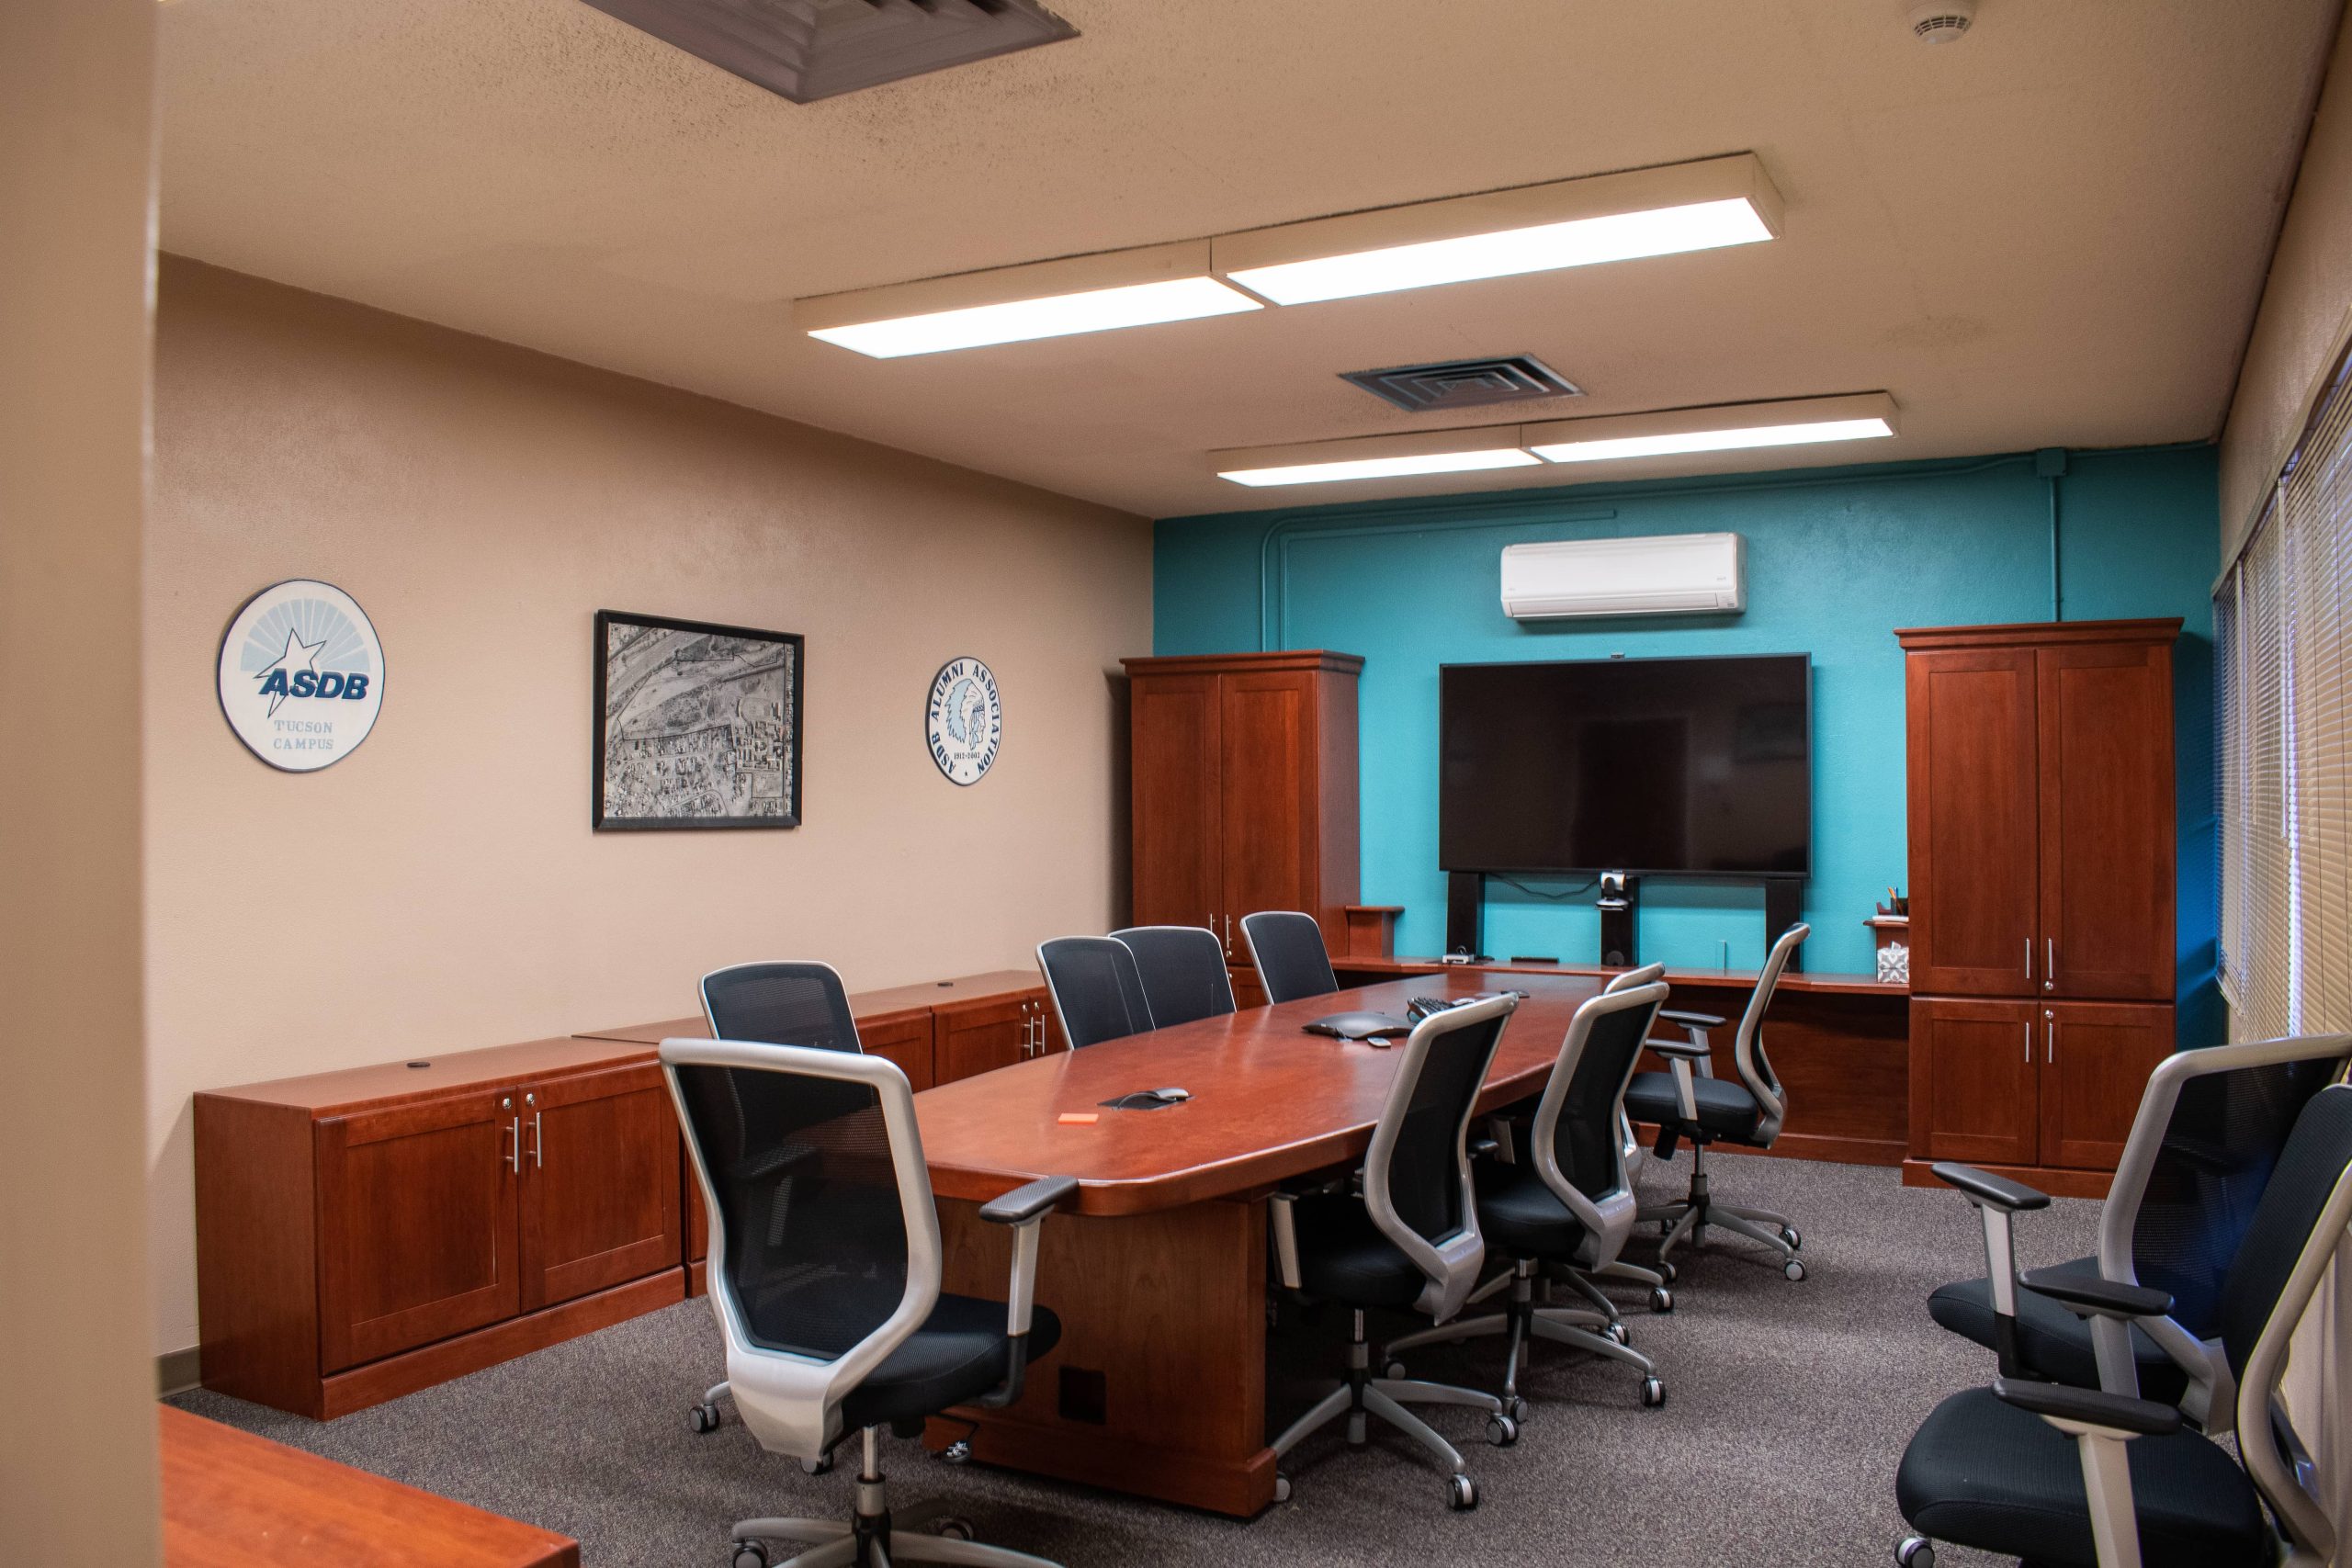 A wide photo of one of the conference rooms on ASDB campus. This particular conference room has an extended table and multiple office chairs. It also has rows of wooden cabinetry and a mounted flatscreen television.